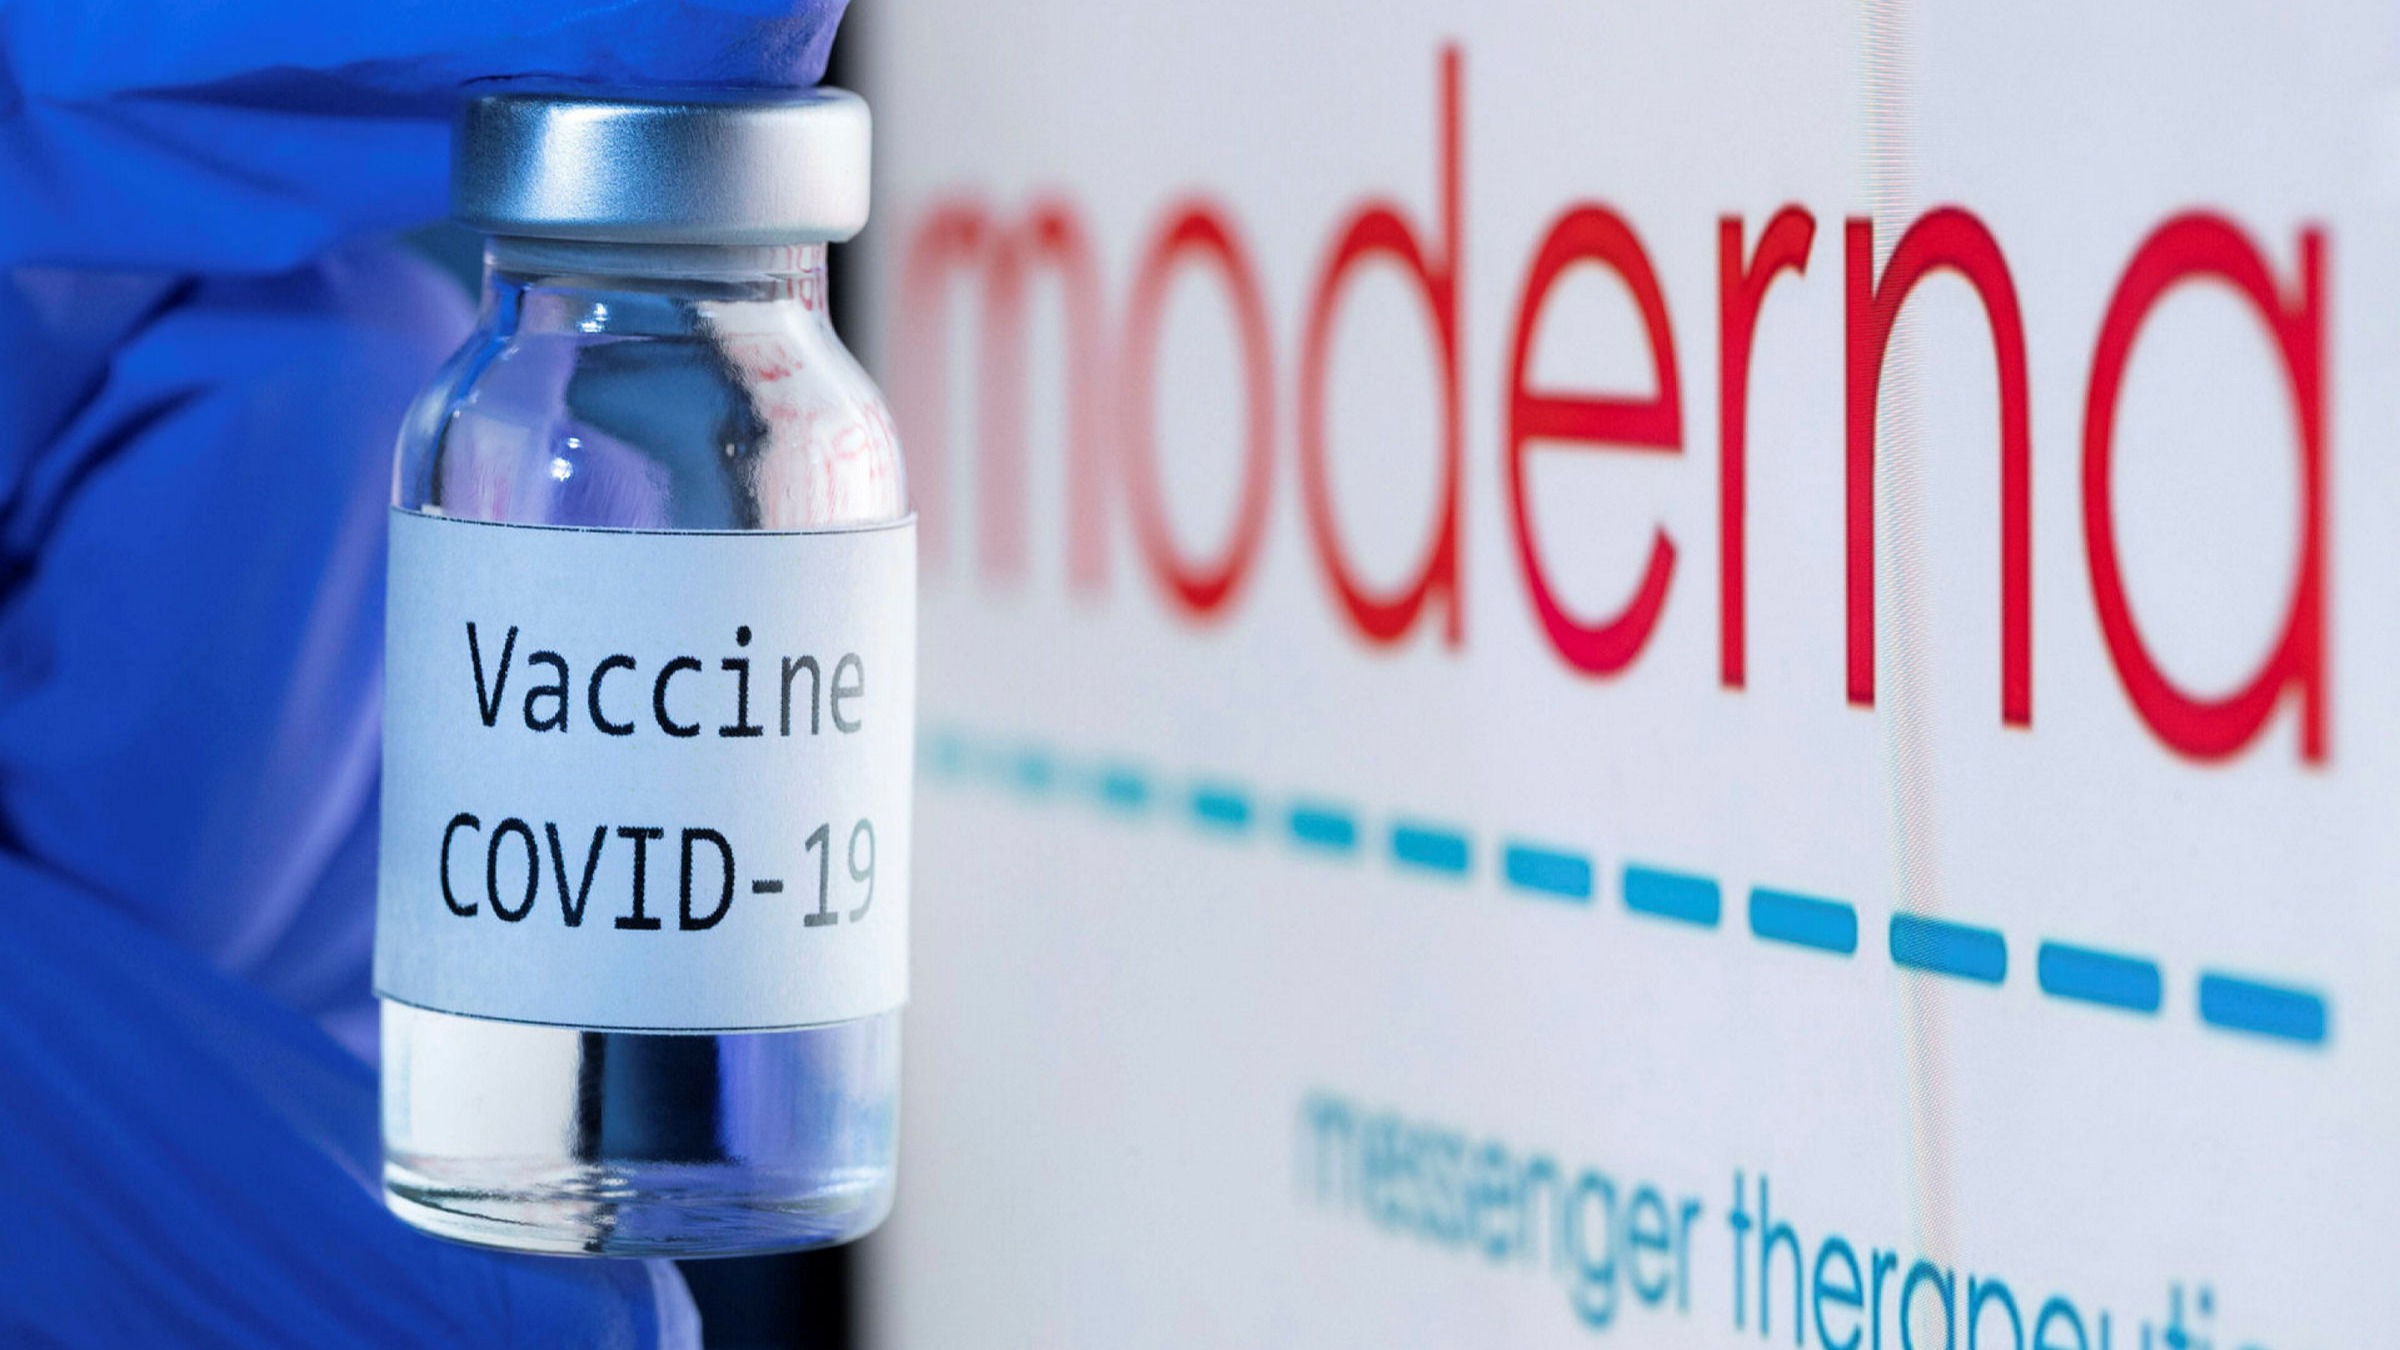 Moderna Covid vaccine set to receive US approval | Financial Times